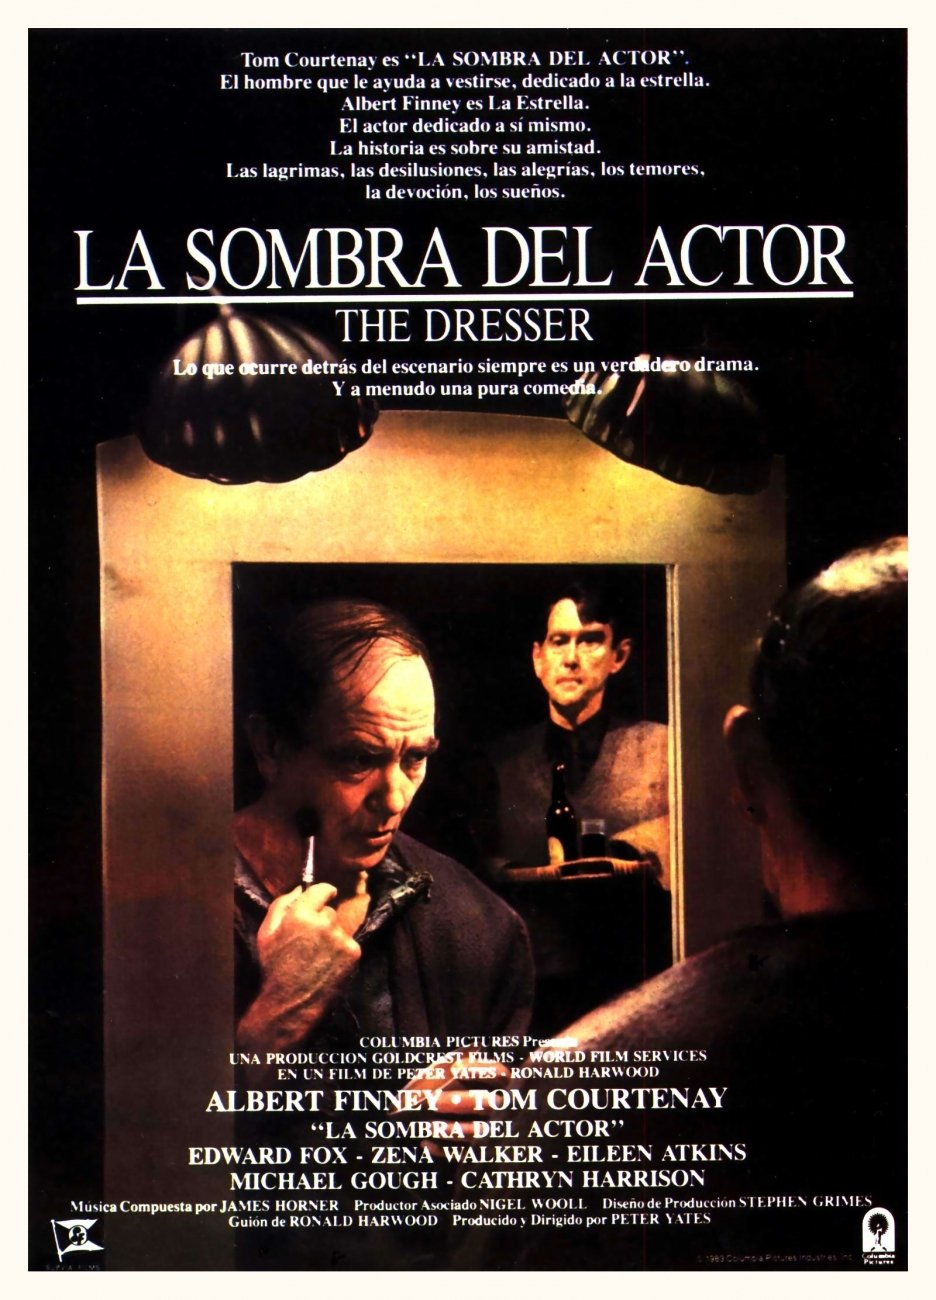 Poster for the movie "The Dresser"